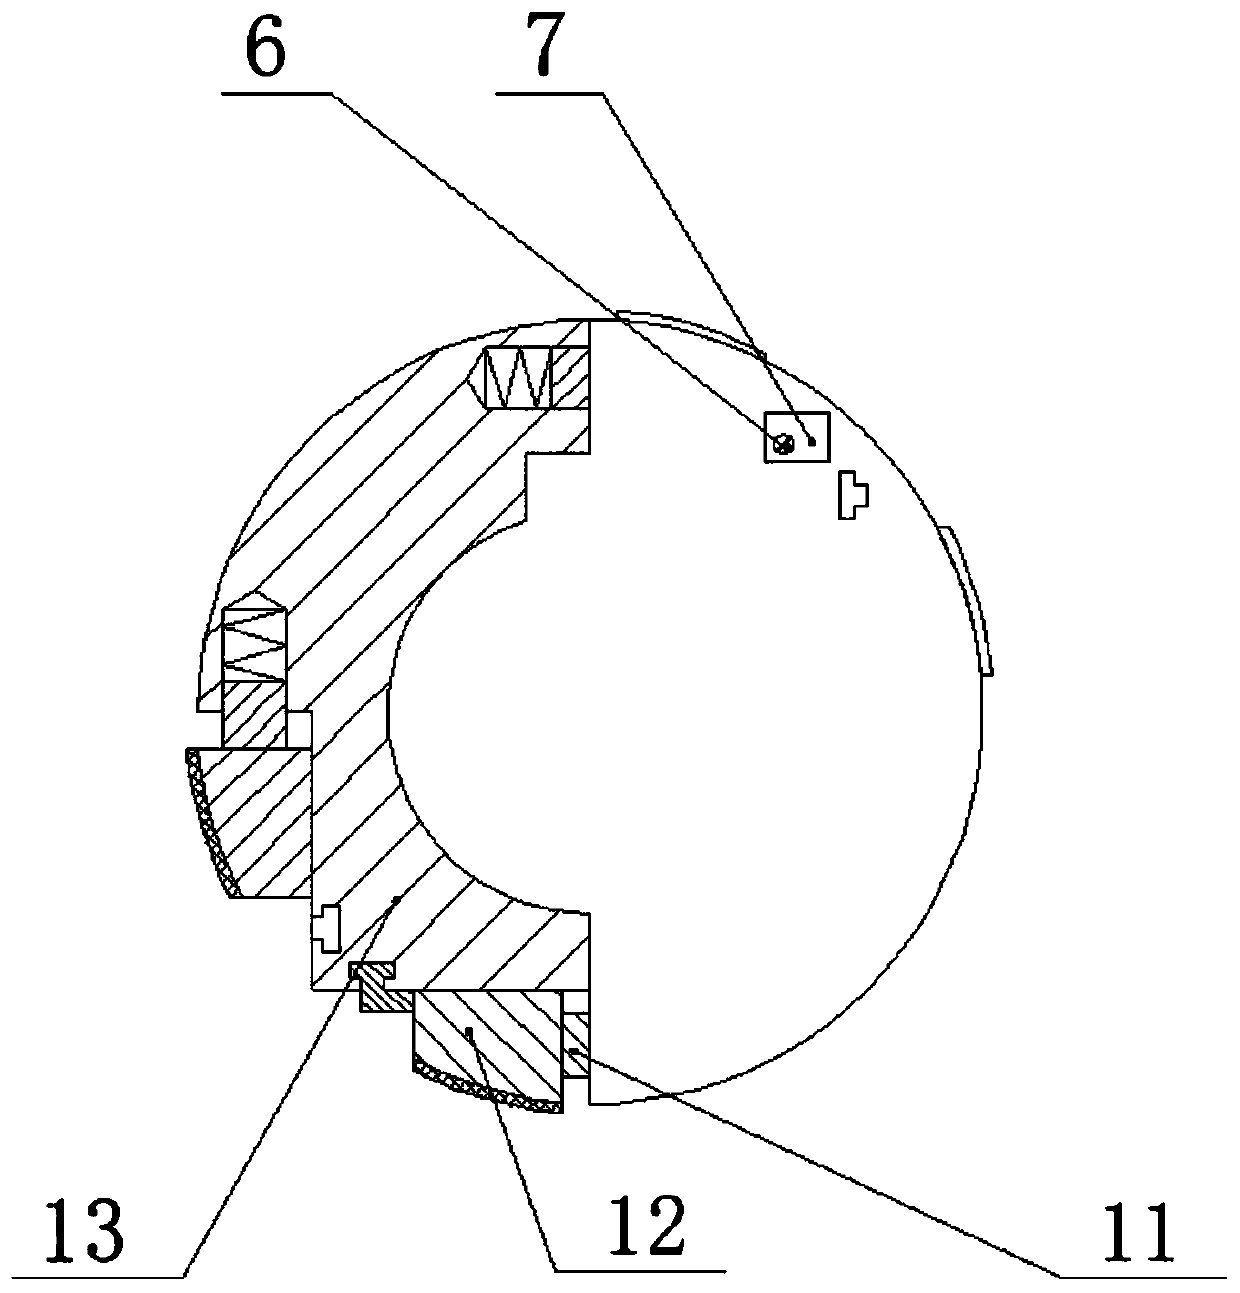 Auxiliary device for controlling one-way transmission of gear train structures